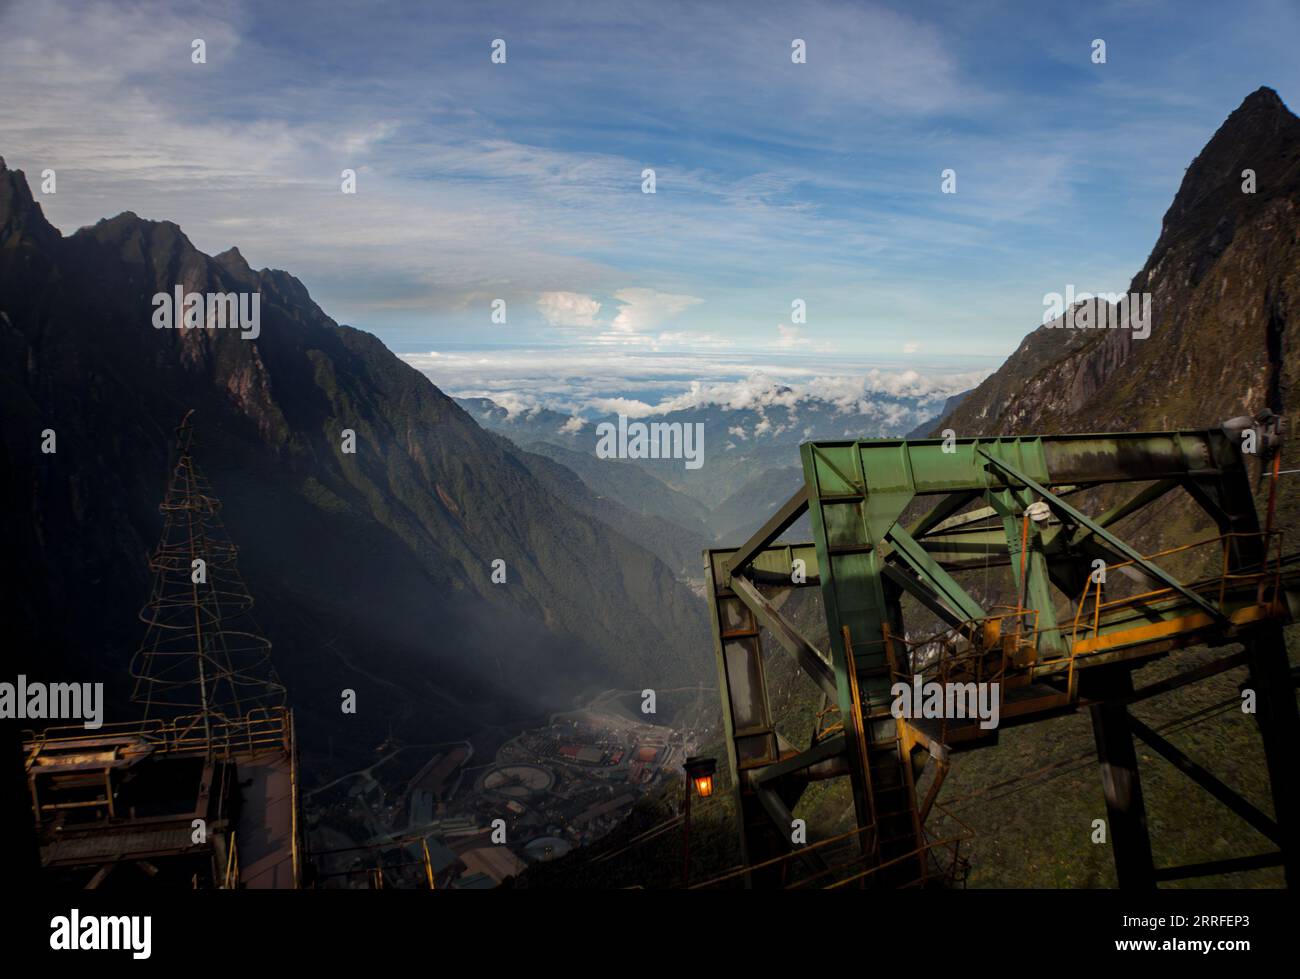 The massive infrastructure from above the mill with a view of the cable car equipment surrounded by mountains Stock Photo